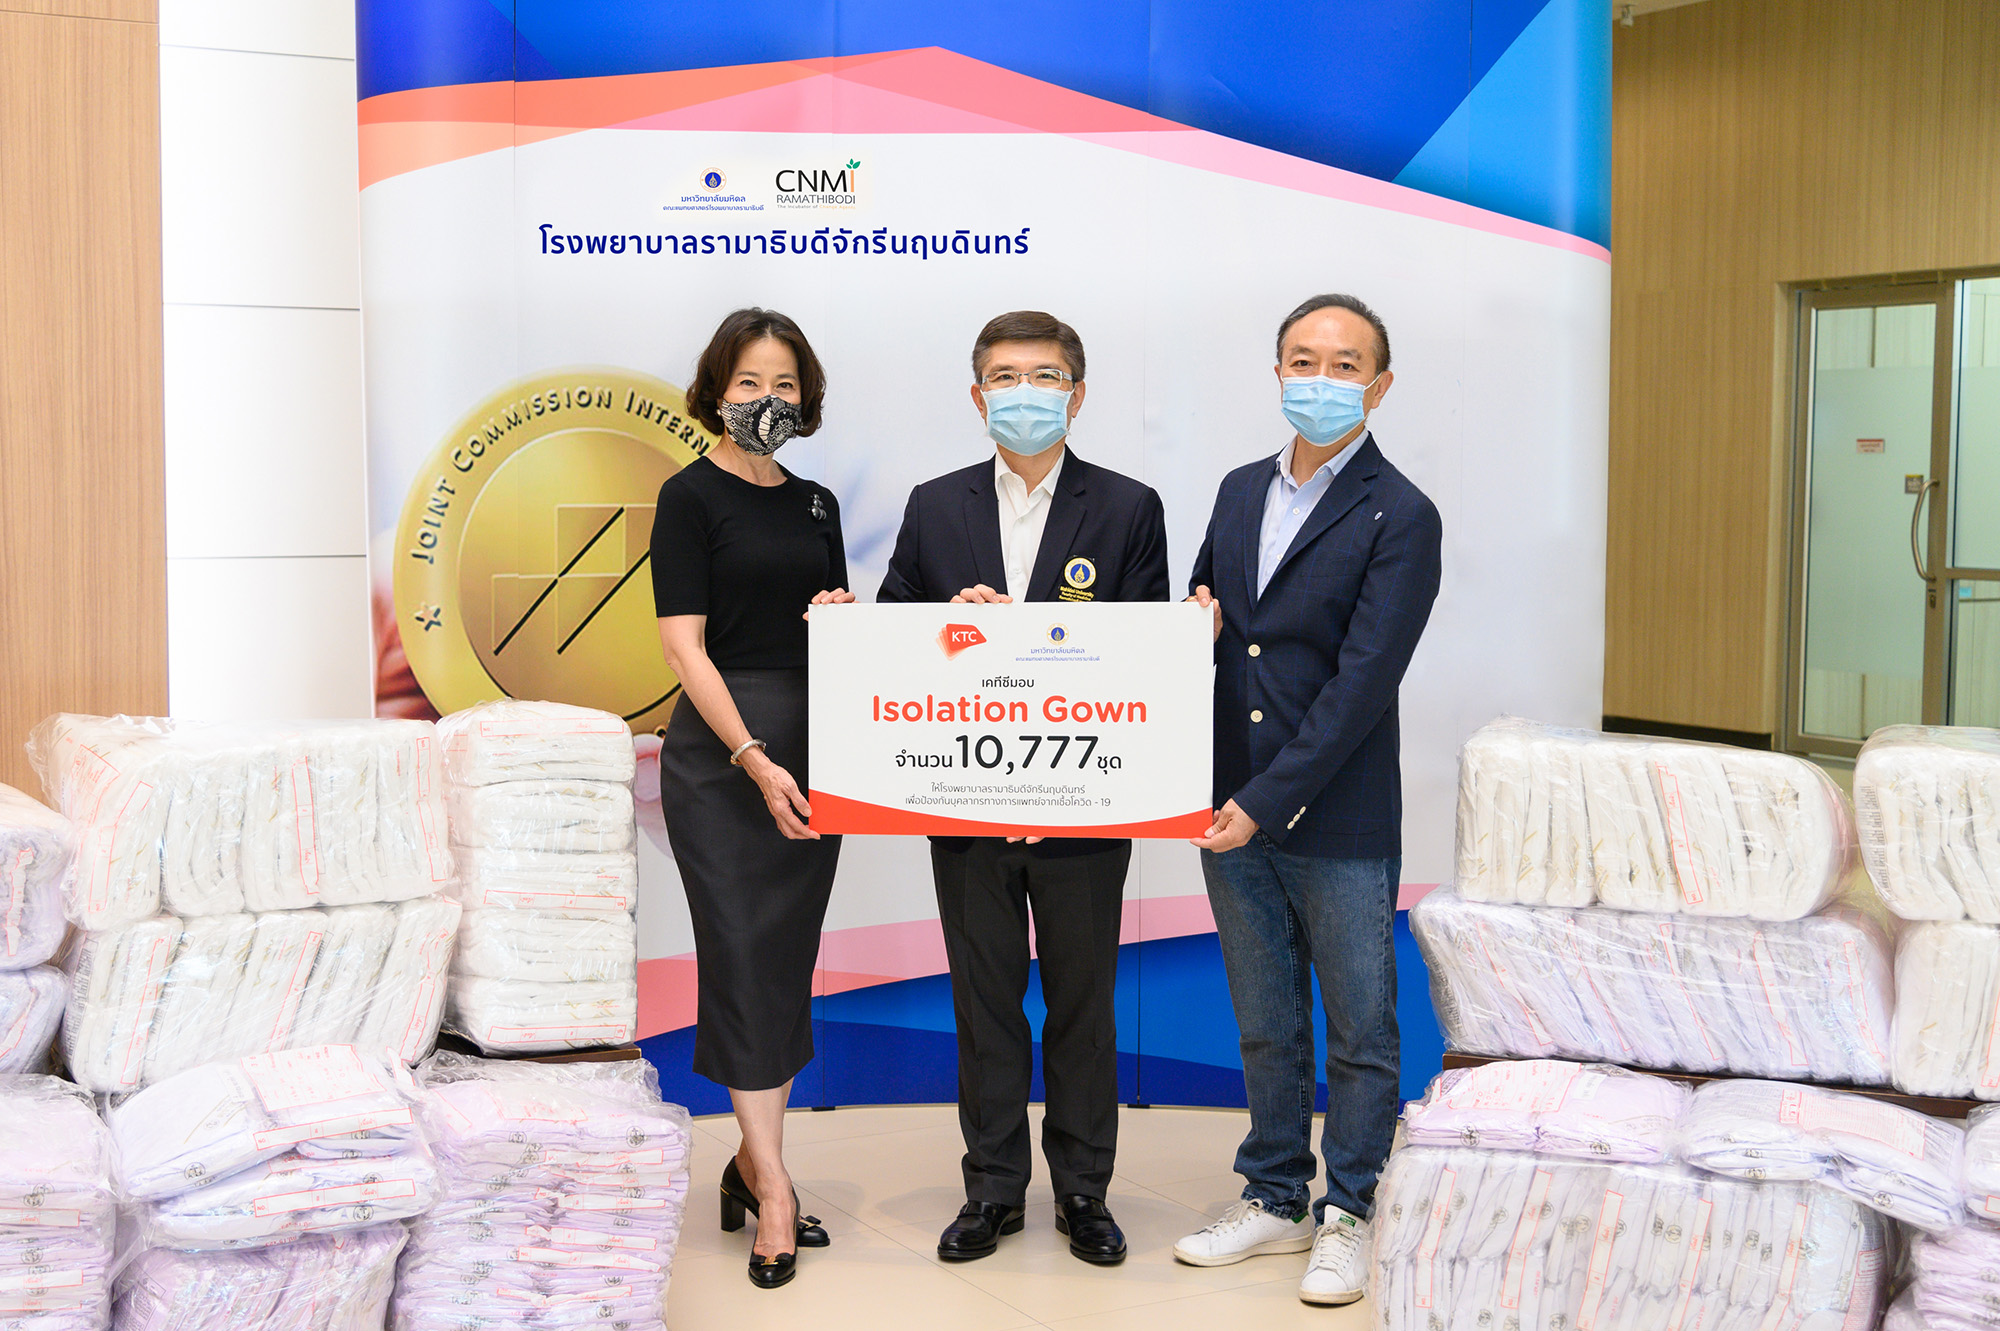 Photo Release: KTC hands over 10,777 Isolation Gowns to Ramadhibodi Chakri Naruebodindra Hospital to prevent medical personnel from Covid-19.